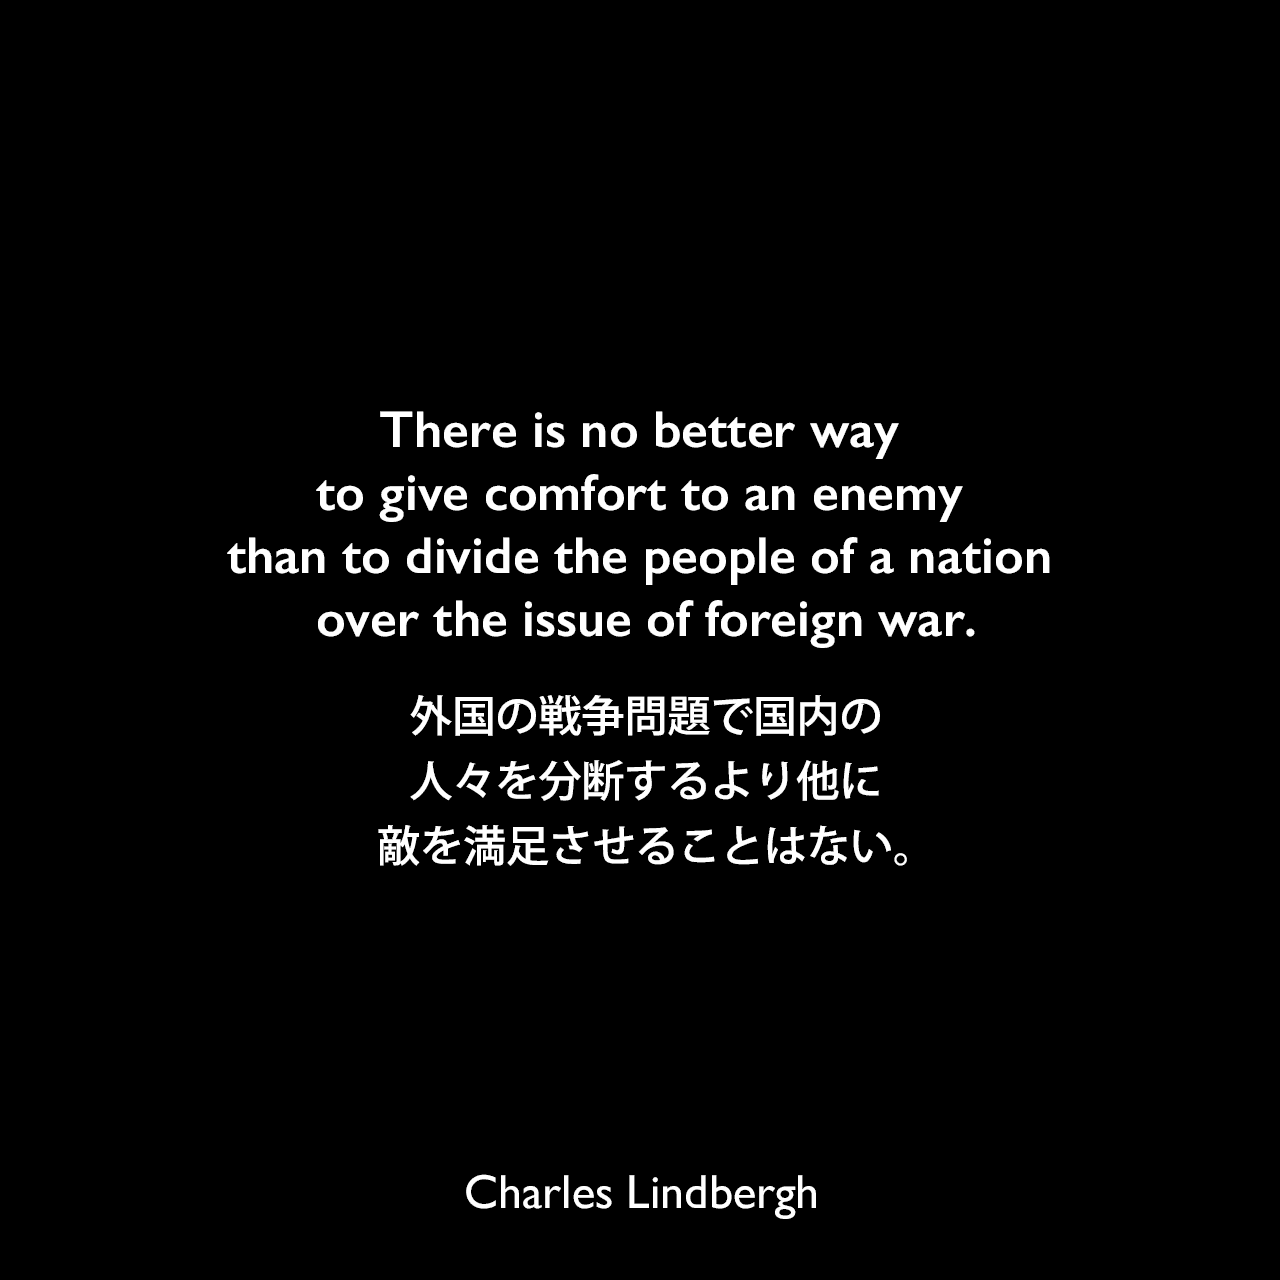 There is no better way to give comfort to an enemy than to divide the people of a nation over the issue of foreign war.外国の戦争問題で国内の人々を分断するより他に、敵を満足させることはない。Charles Lindbergh